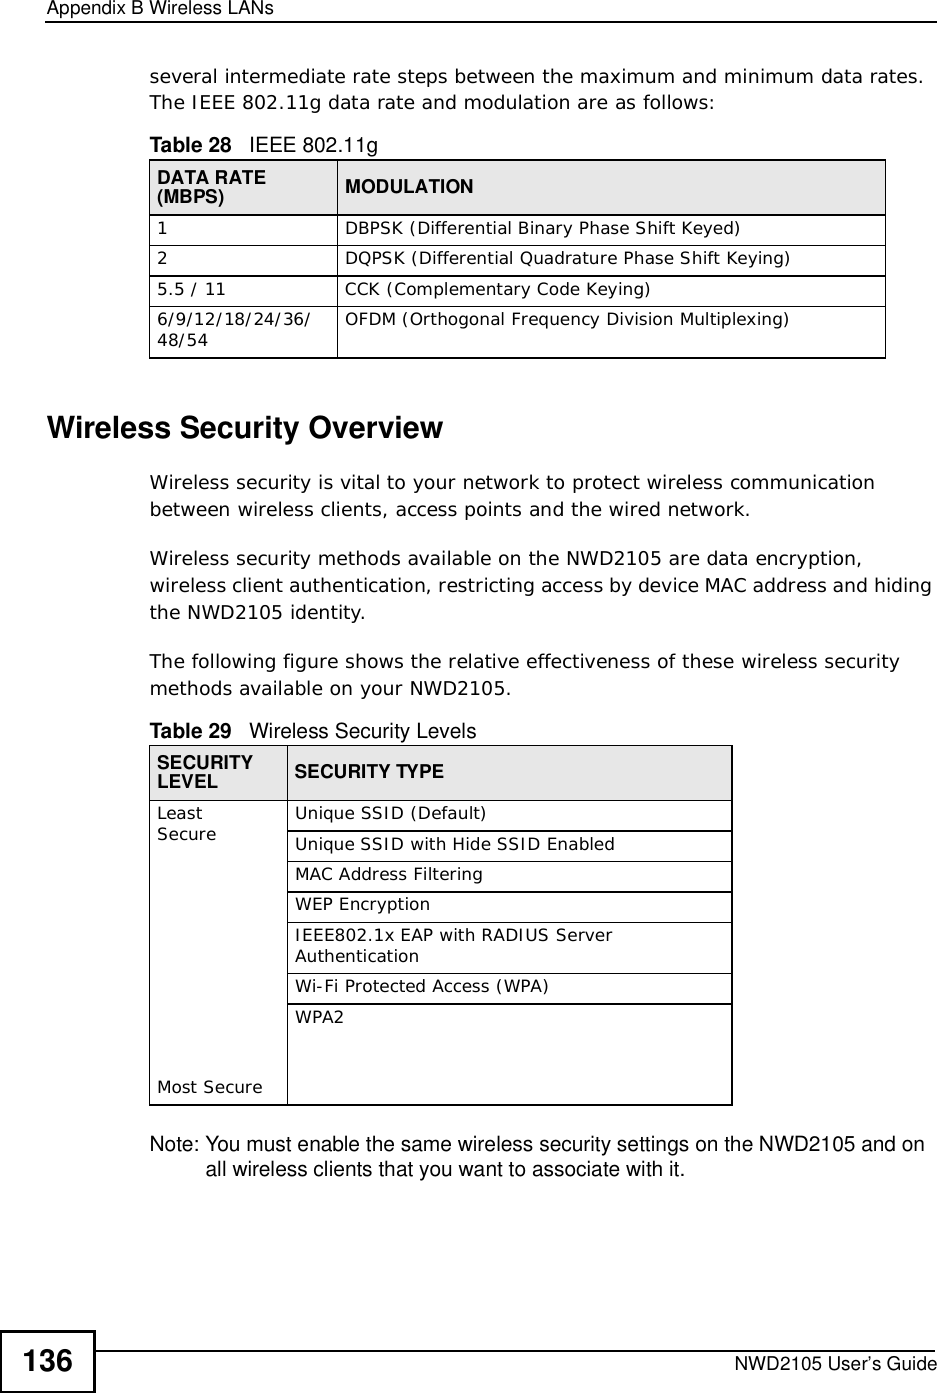 Appendix BWireless LANsNWD2105 User’s Guide136several intermediate rate steps between the maximum and minimum data rates. The IEEE 802.11g data rate and modulation are as follows:Wireless Security OverviewWireless security is vital to your network to protect wireless communication between wireless clients, access points and the wired network.Wireless security methods available on the NWD2105 are data encryption, wireless client authentication, restricting access by device MAC address and hiding the NWD2105 identity.The following figure shows the relative effectiveness of these wireless security methods available on your NWD2105.Note: You must enable the same wireless security settings on the NWD2105 and on all wireless clients that you want to associate with it. Table 28   IEEE 802.11gDATA RATE (MBPS) MODULATION1DBPSK (Differential Binary Phase Shift Keyed)2DQPSK (Differential Quadrature Phase Shift Keying)5.5 / 11CCK (Complementary Code Keying) 6/9/12/18/24/36/48/54 OFDM (Orthogonal Frequency Division Multiplexing) Table 29   Wireless Security LevelsSECURITYLEVEL SECURITY TYPELeast       SecureMost SecureUnique SSID (Default)Unique SSID with Hide SSID EnabledMAC Address FilteringWEP EncryptionIEEE802.1x EAP with RADIUS Server AuthenticationWi-Fi Protected Access (WPA)WPA2